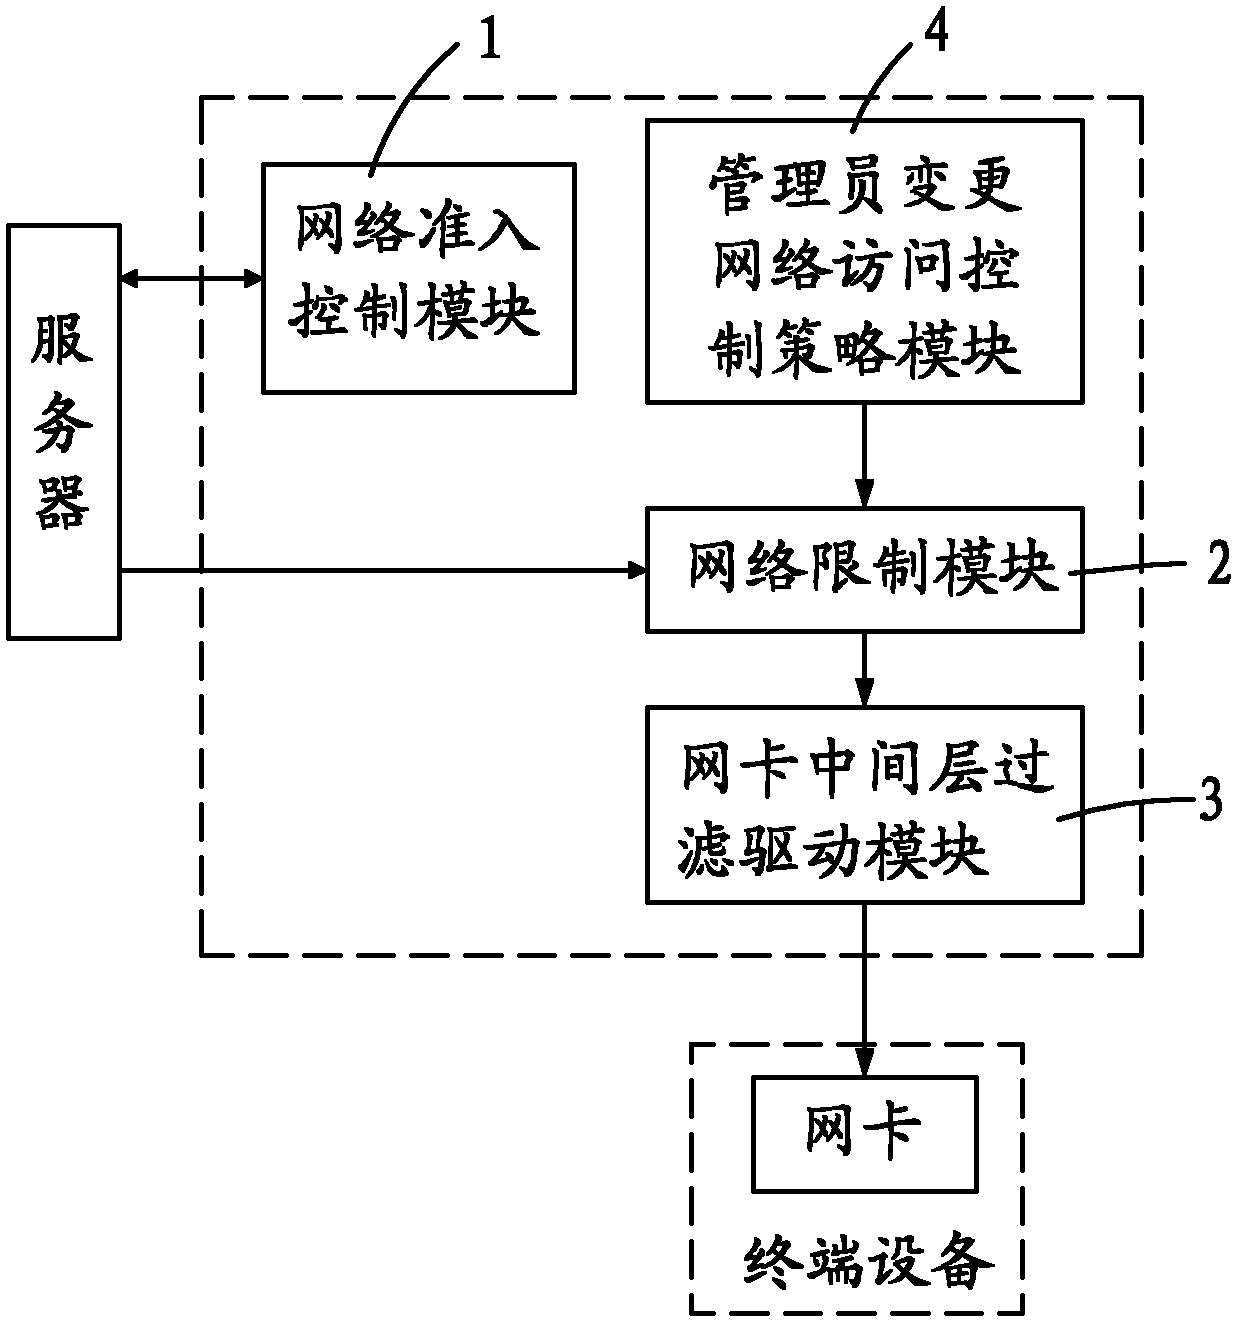 Terminal-based network access control system